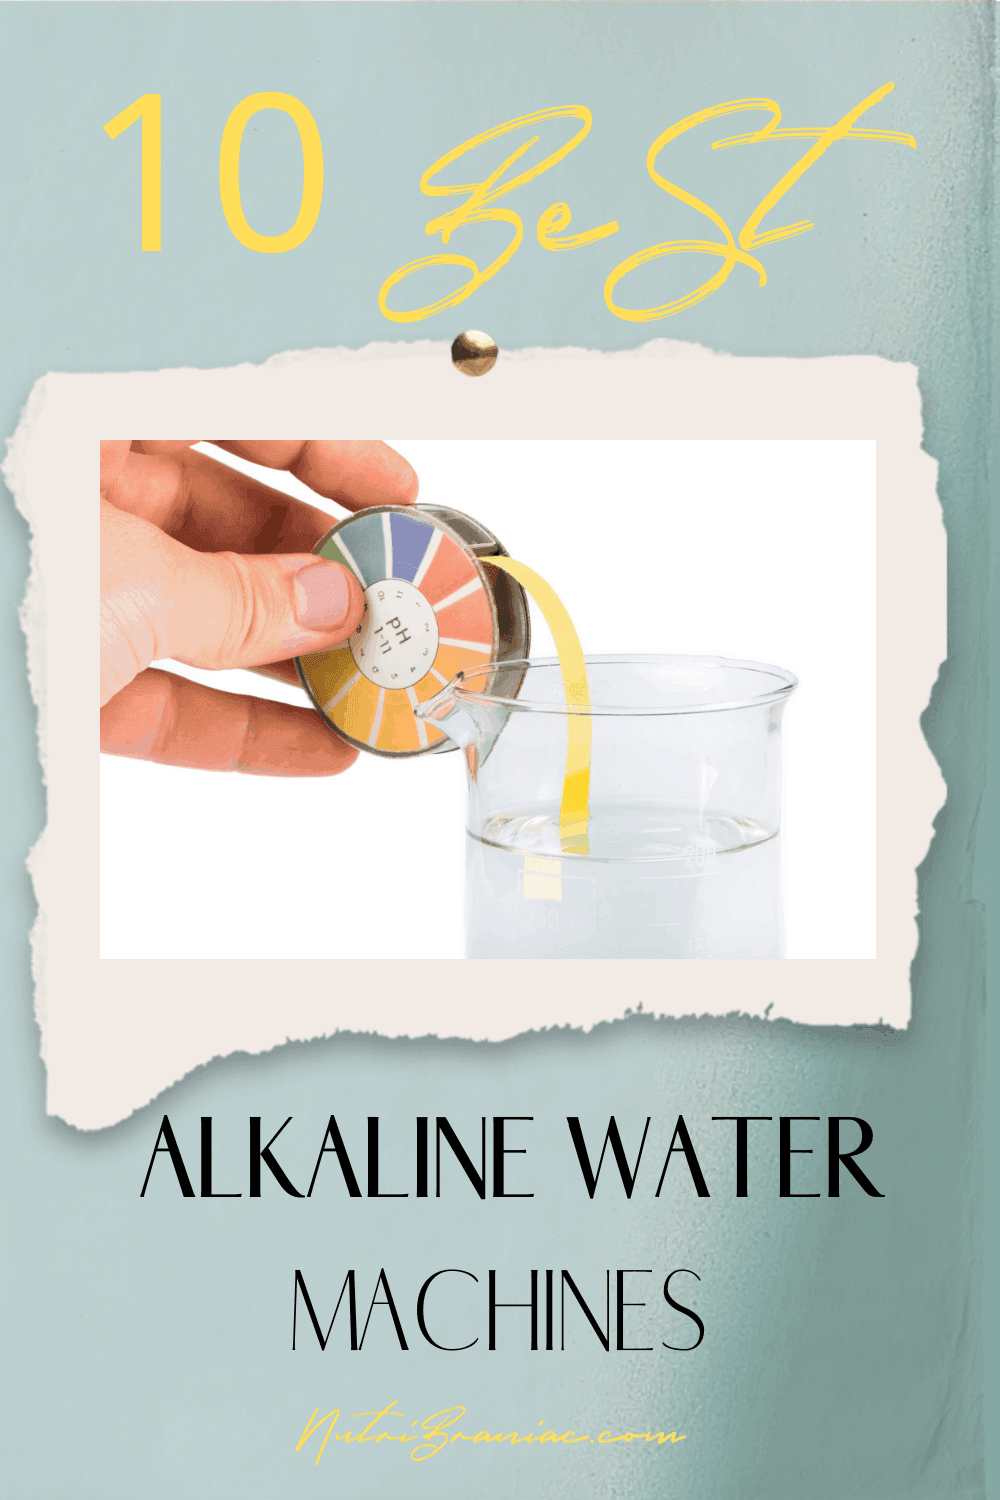 Image of a ph test strip in a glass of water with text overlay "10 Best Alkaline Water Machines"